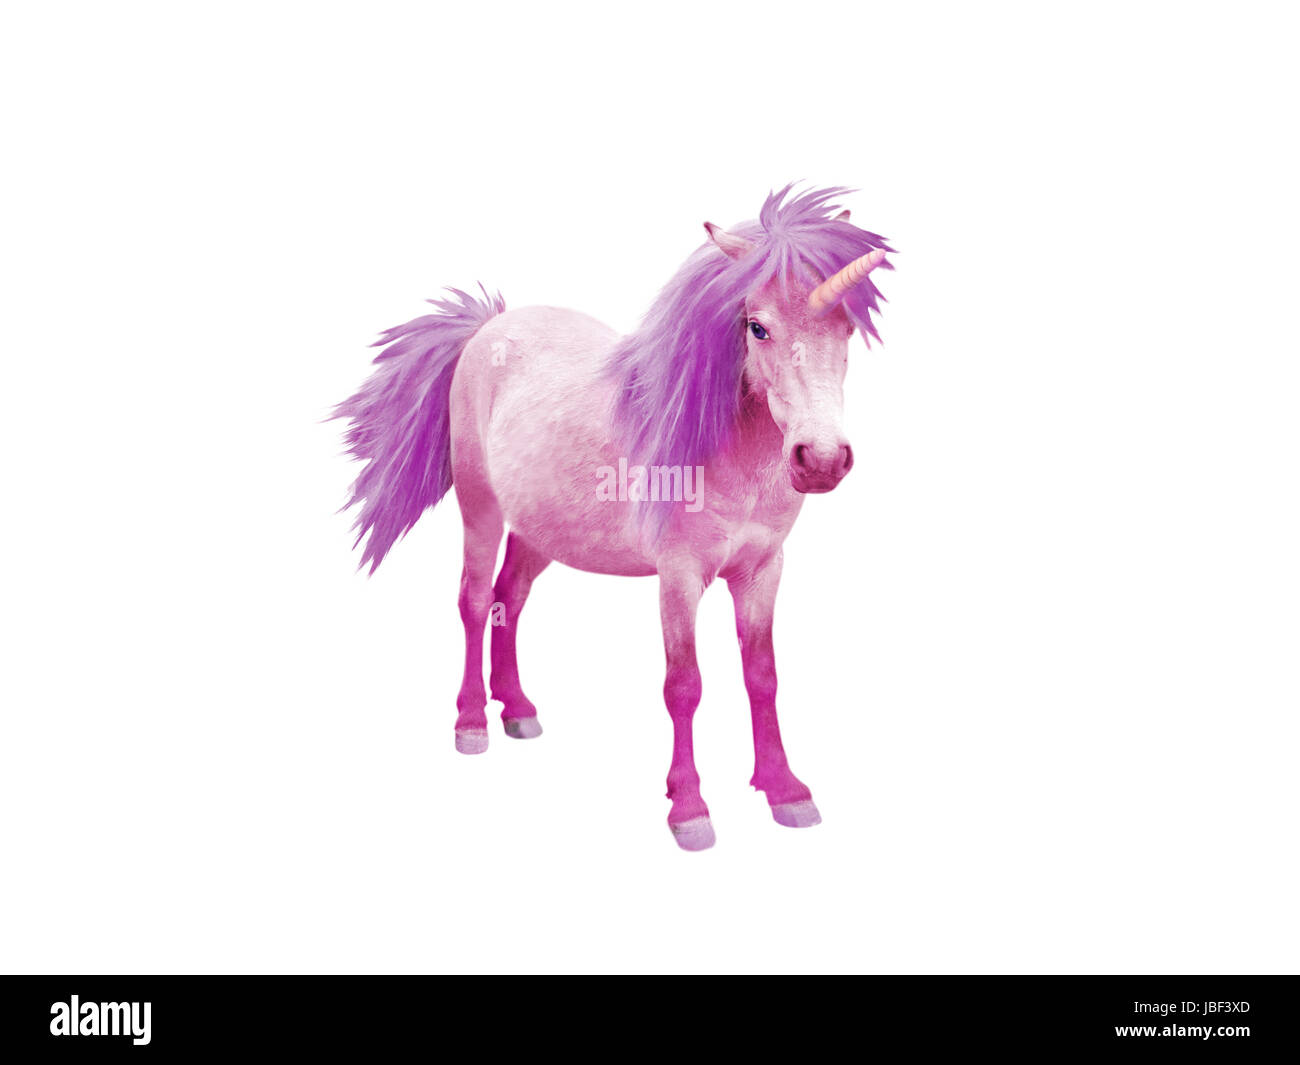 Pink baby unicorn horse with violet mane and tail isolated on white Stock Photo